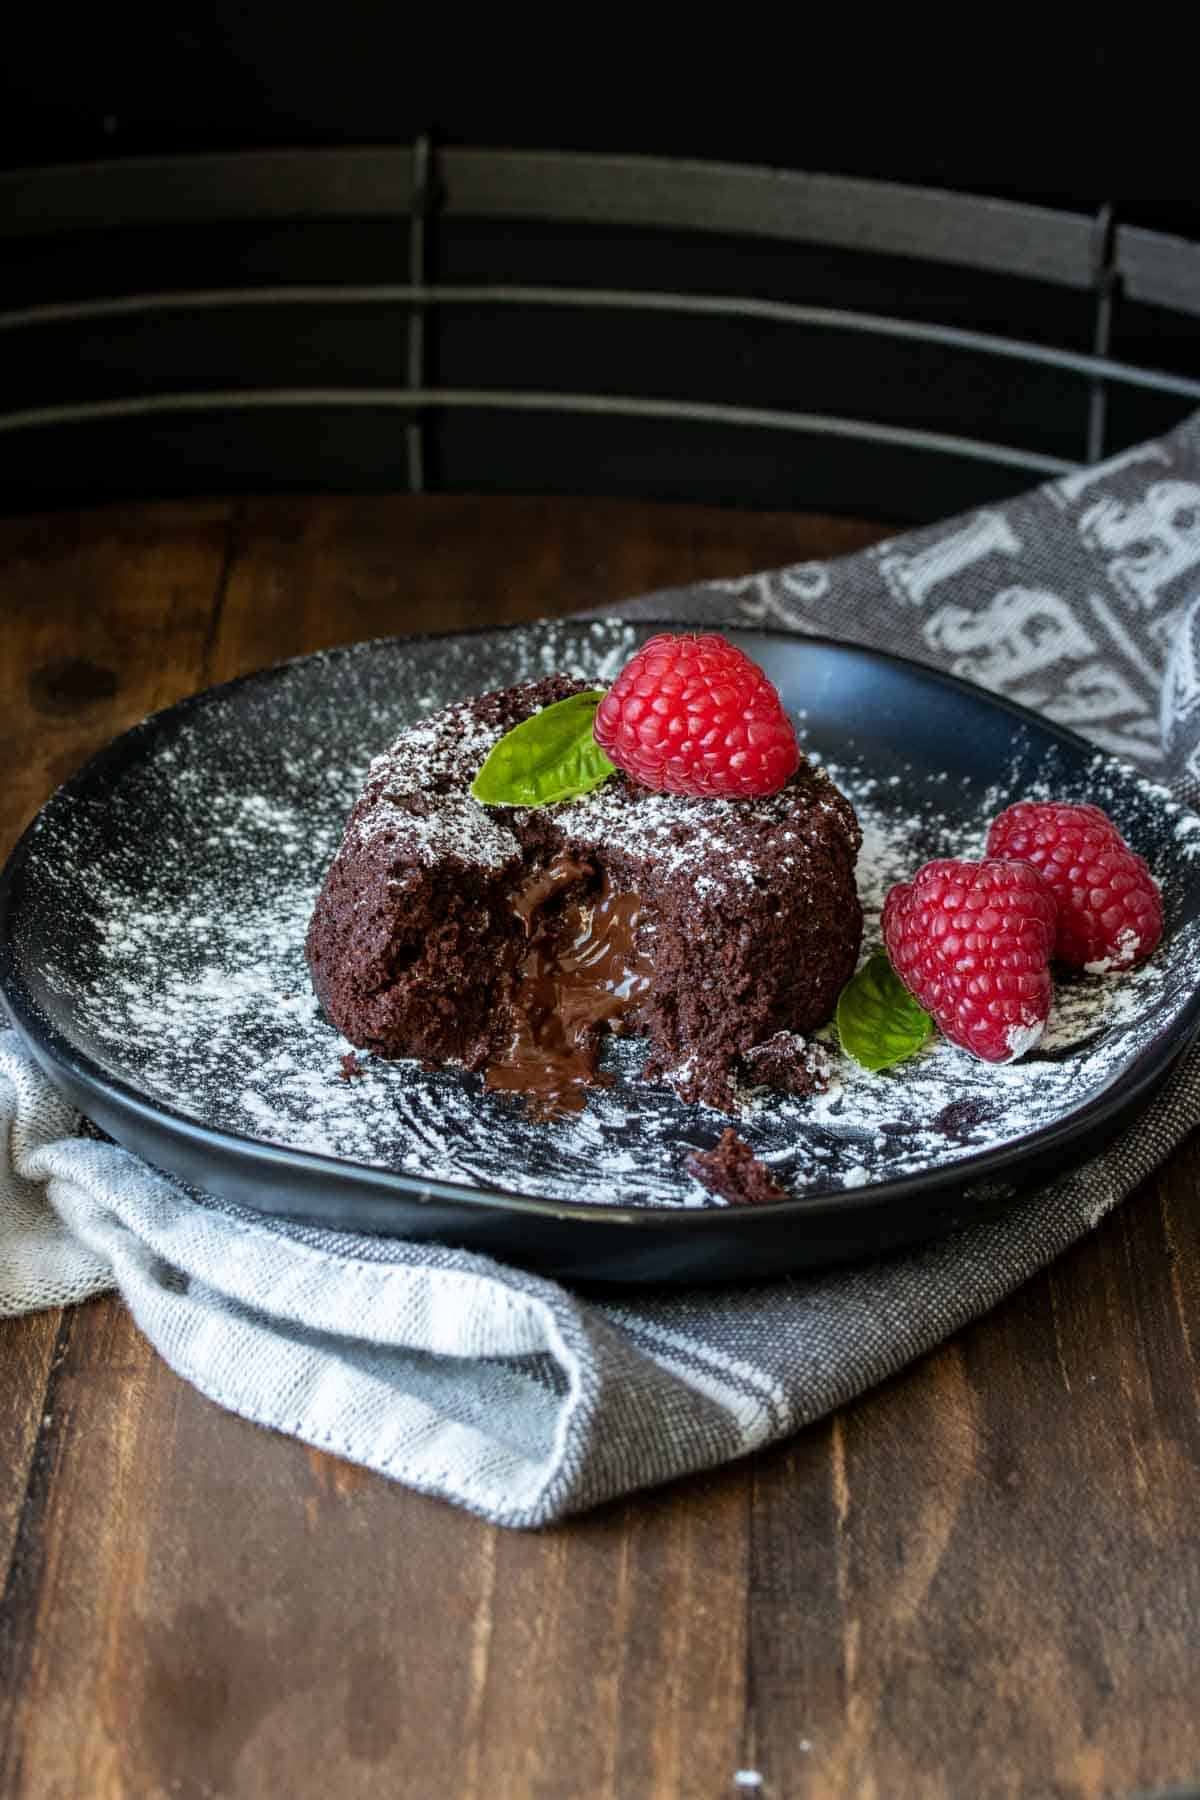 Cut open chocolate lava cake on a black plate with raspberries